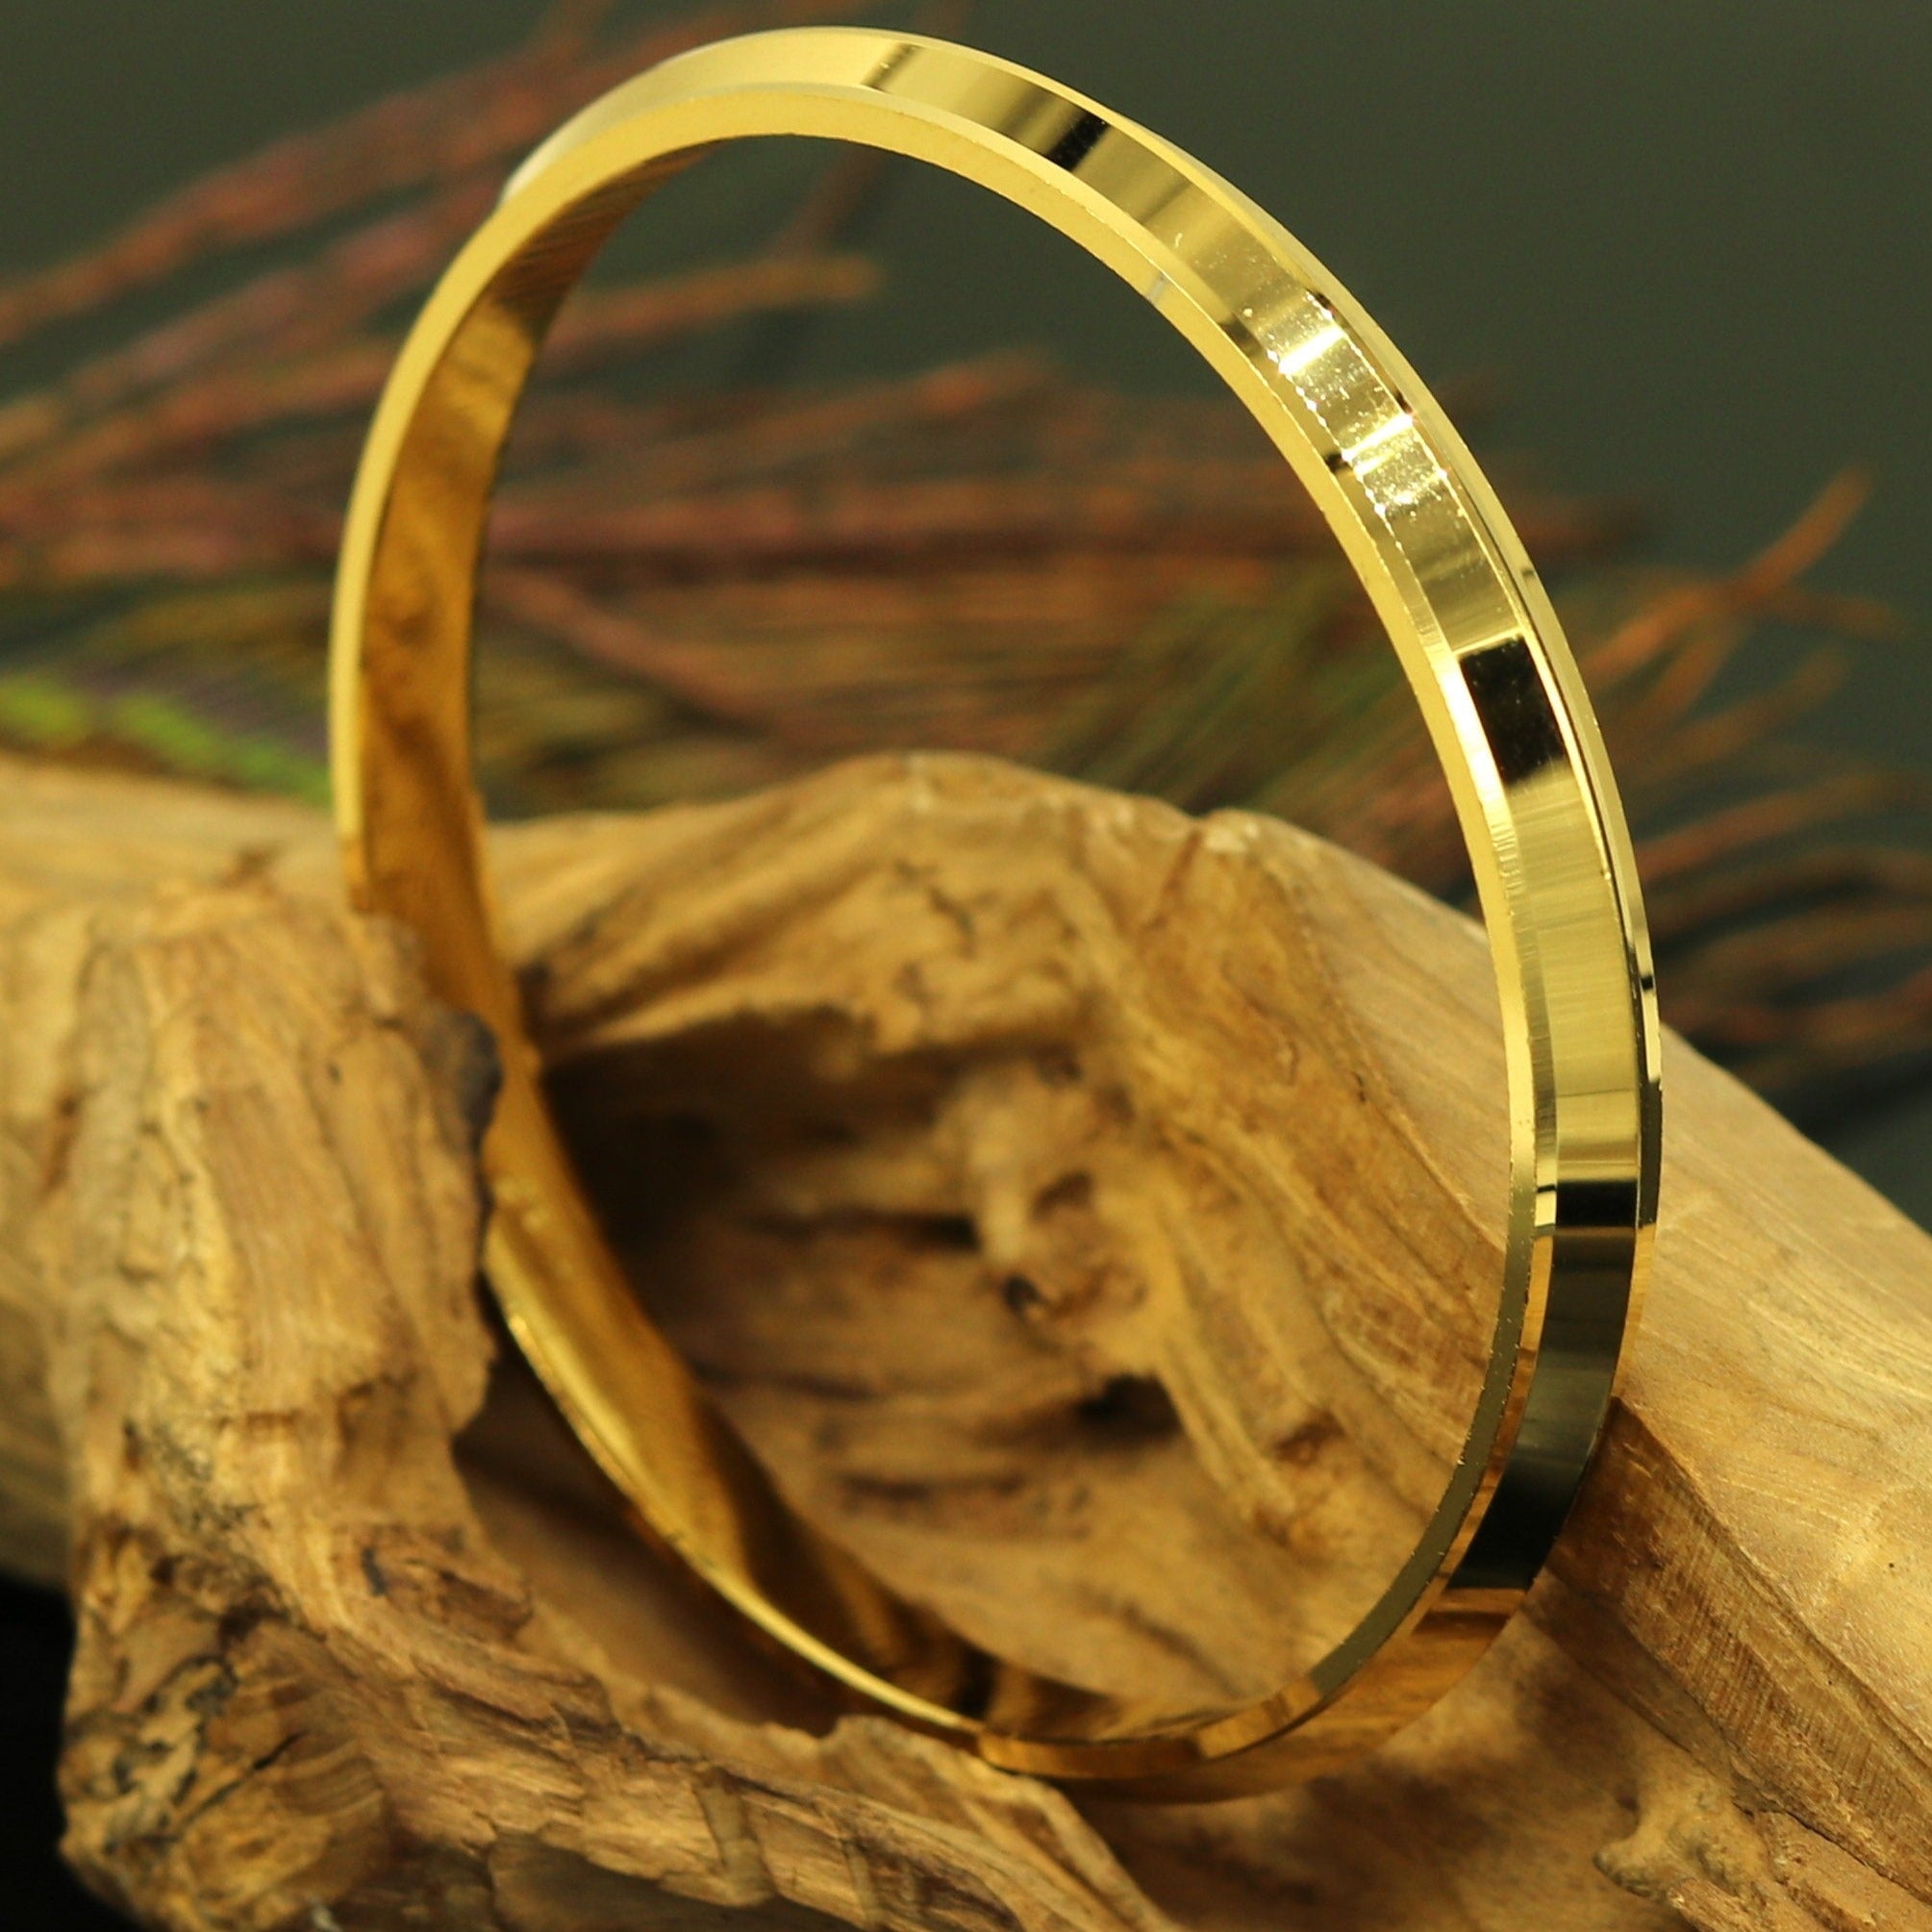 STEEL AND BRASS WITH EDGES BANGLE PUNJABI KADA FOR GIRLS LADIES .1 INCH  SLIM BY THE AMRITSAR STORE